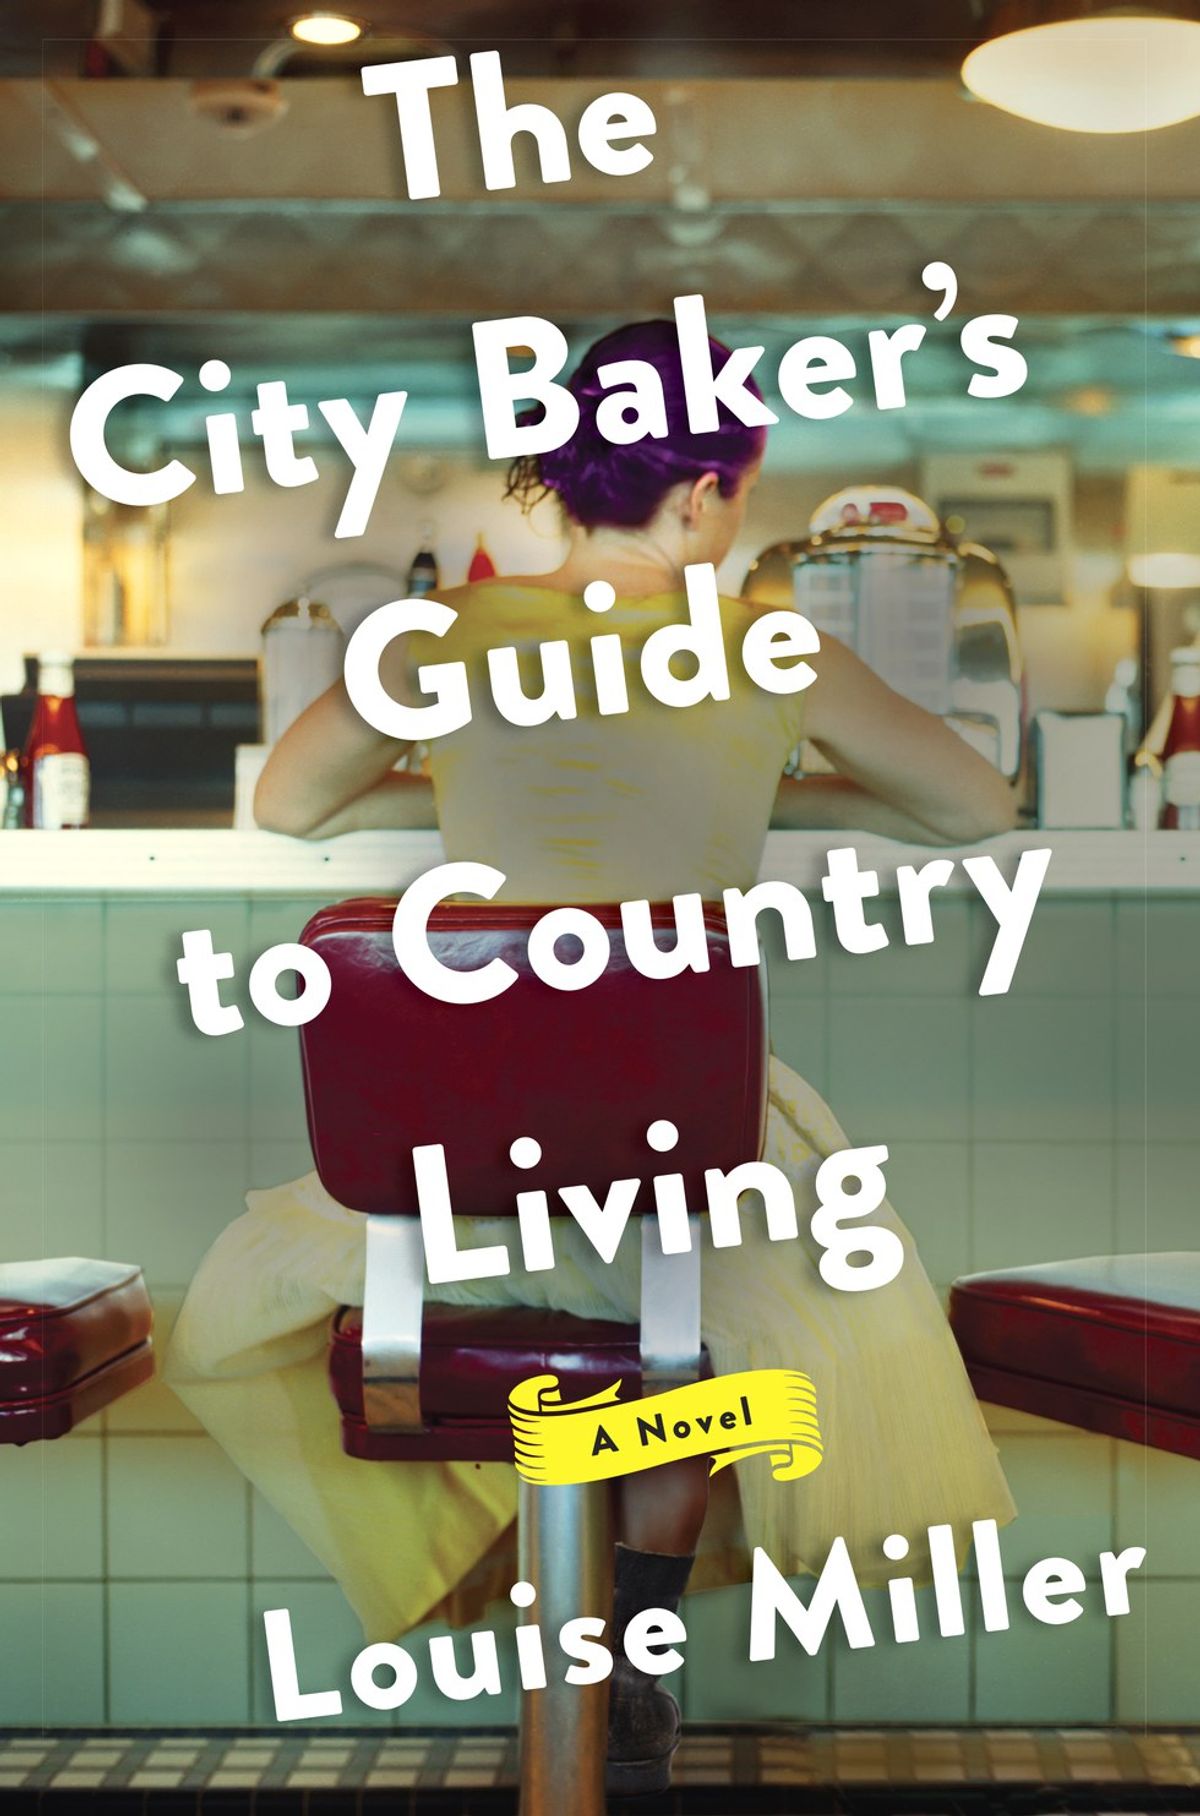 Book Review : The City Bakers Guide to Country Living